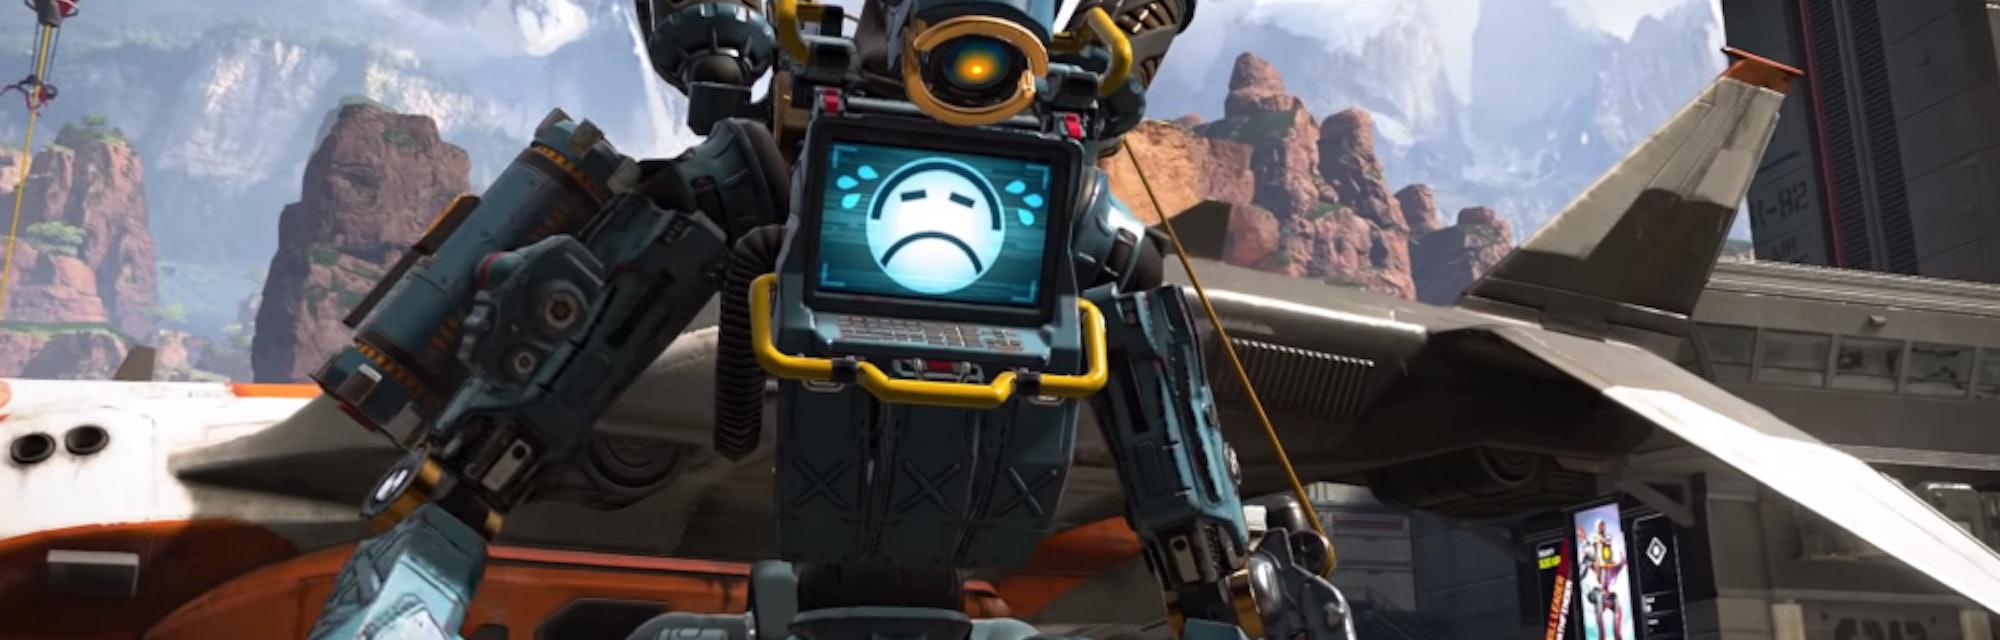 Apex Legends Season 2 Changes Will Nerf One Character To Fix The Meta